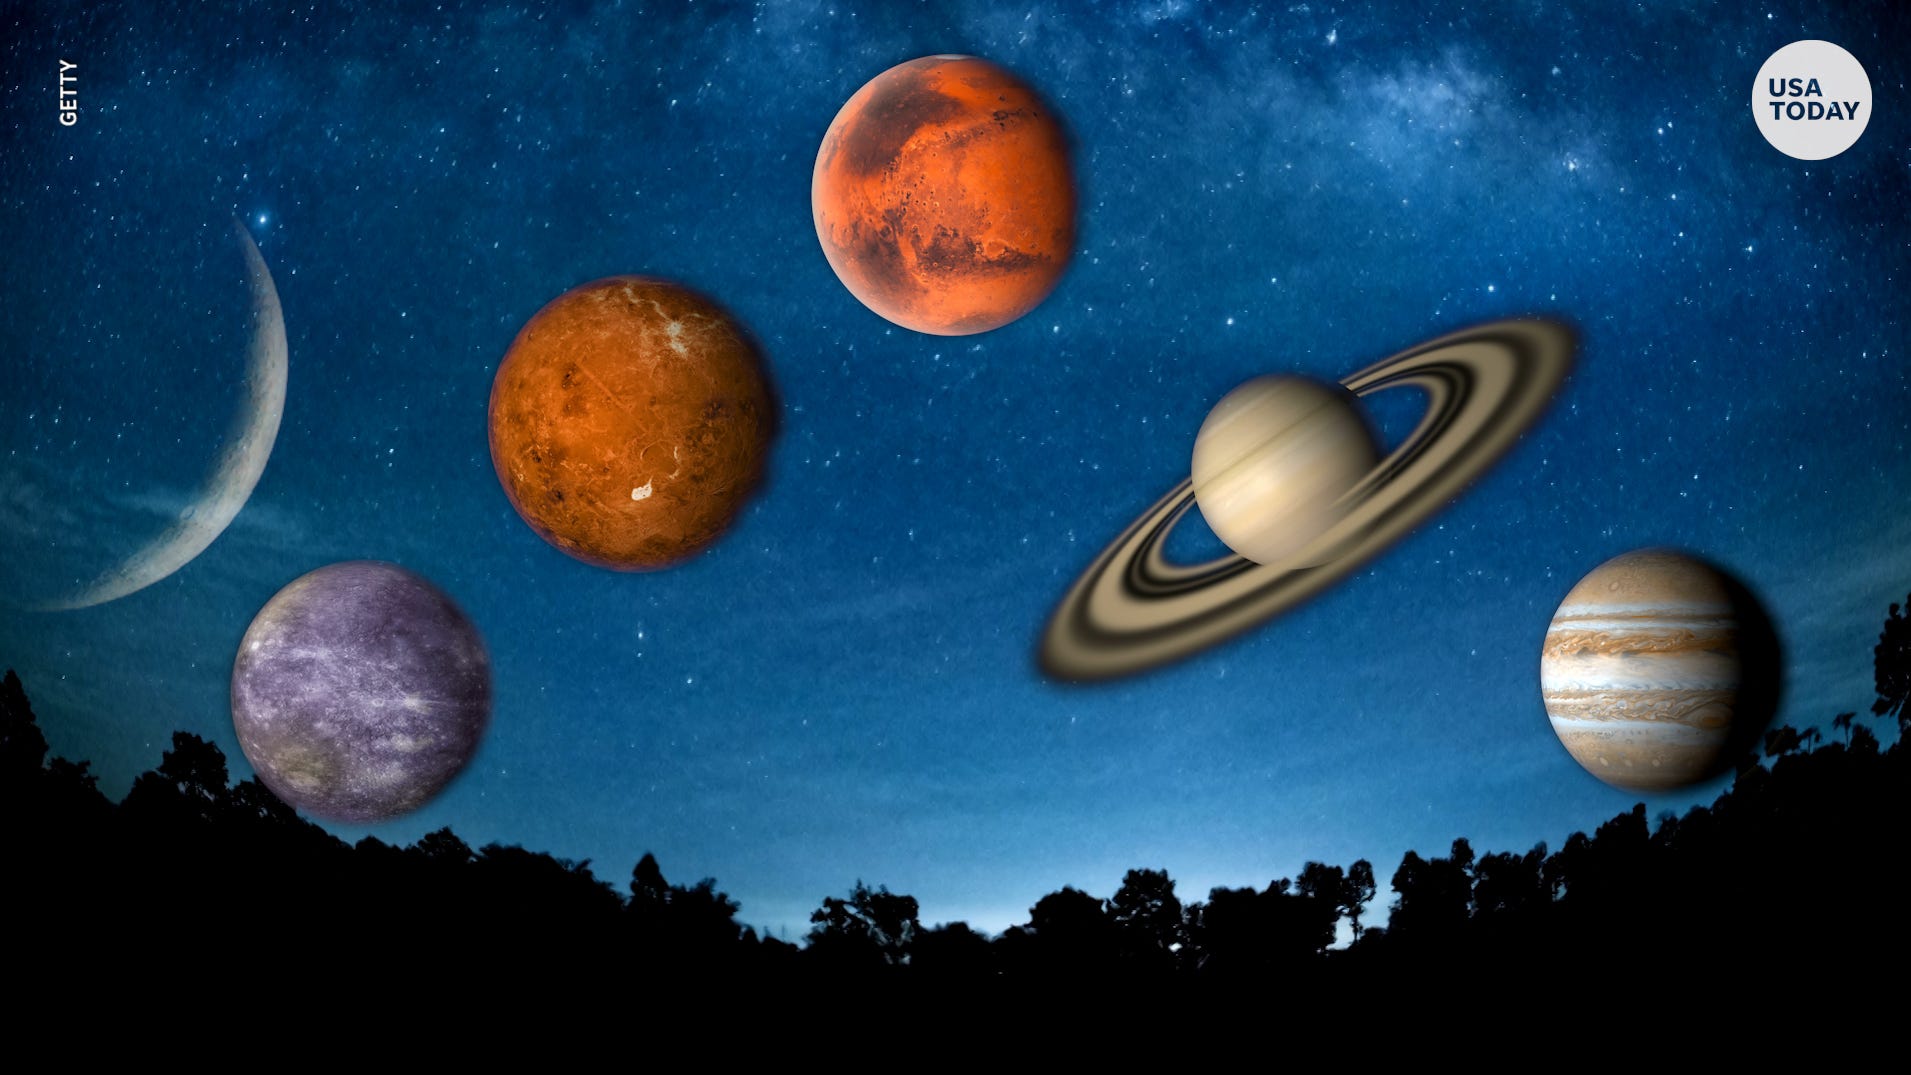 Rare celestial view: See the moon and 5 planets simultaneously